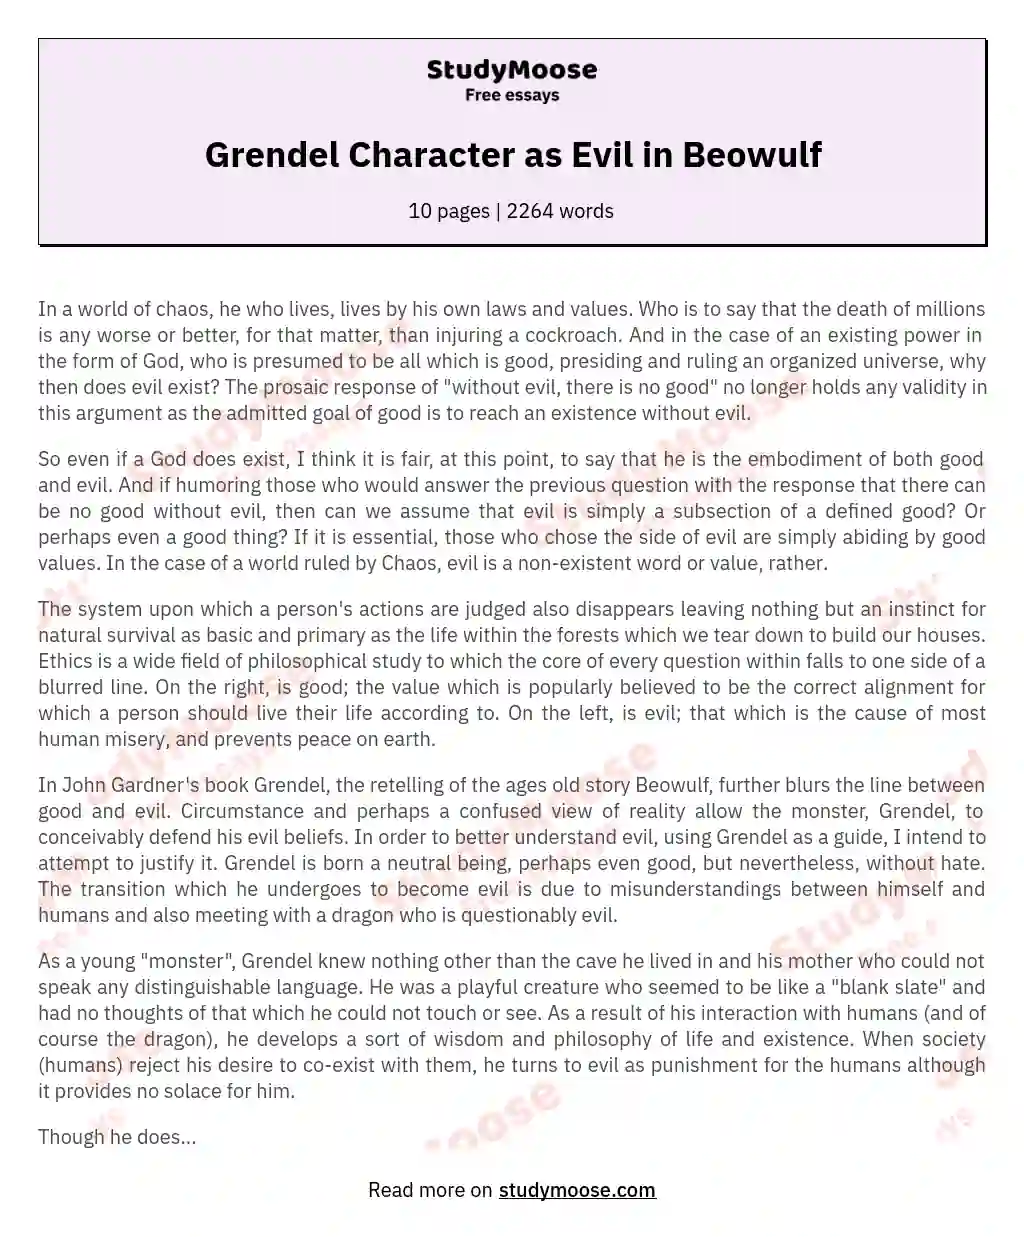 Grendel Character as Evil in Beowulf essay